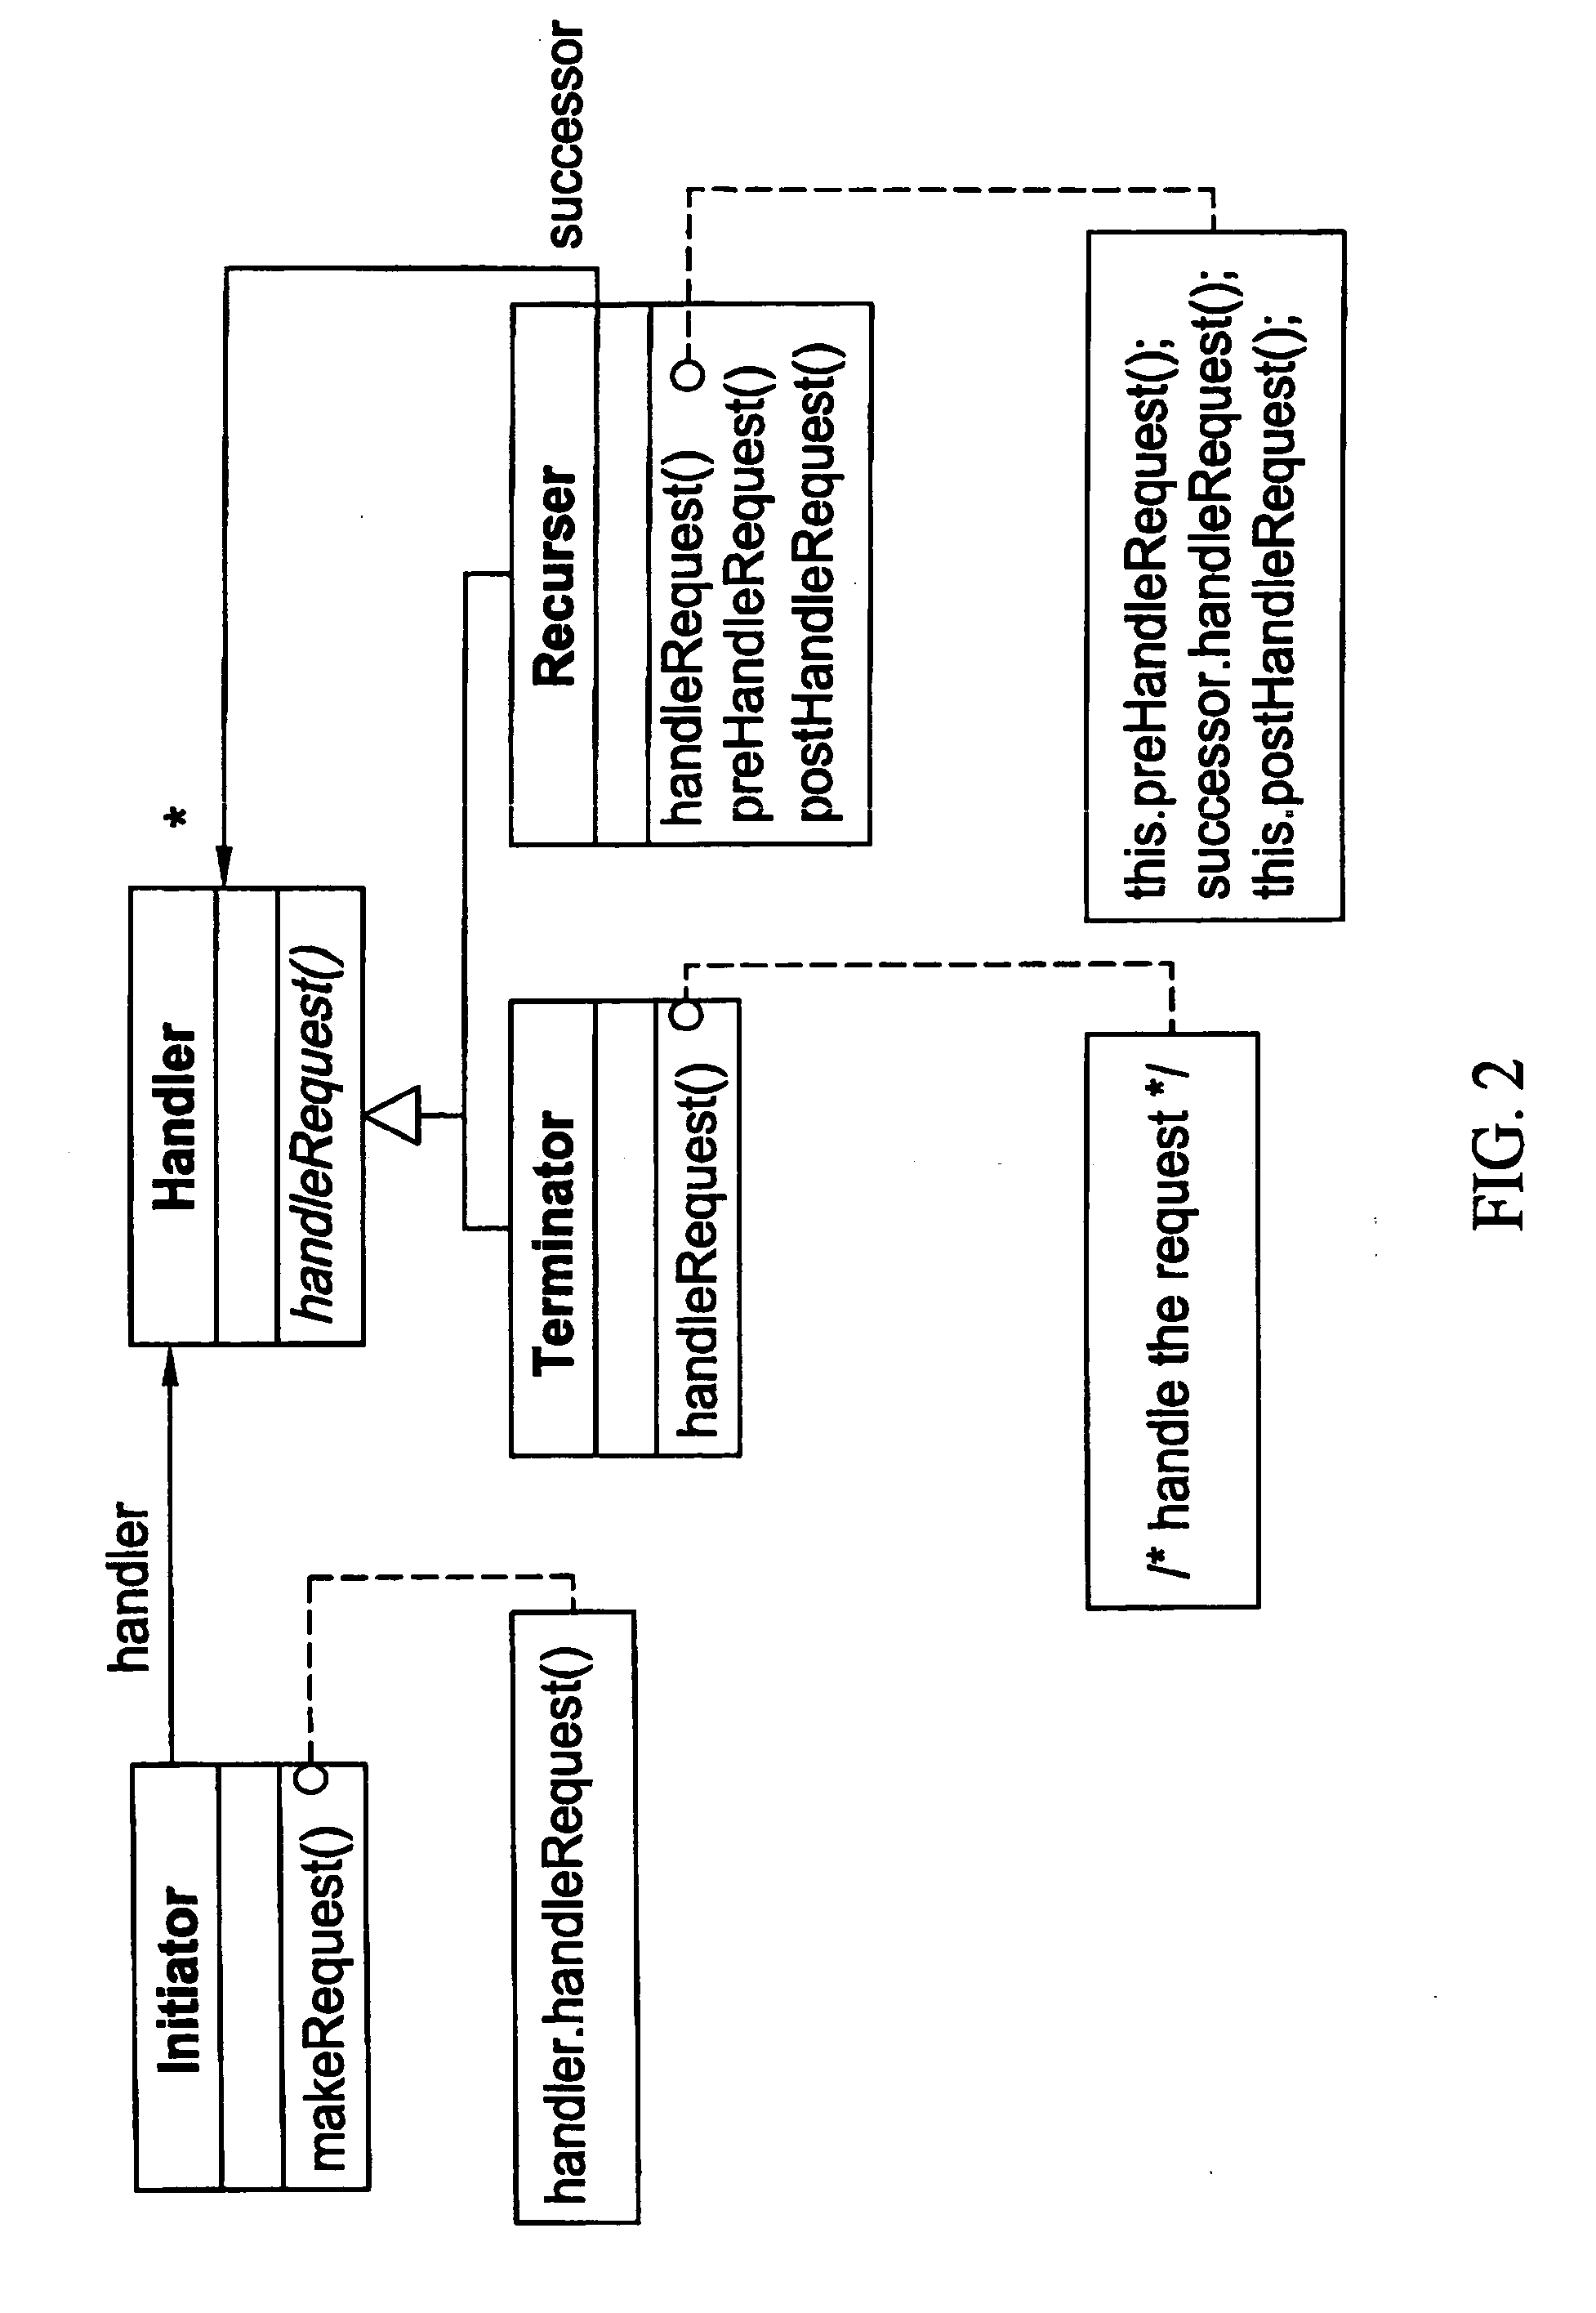 Methods, systems, and computer program products for identifying computer program source code constructs